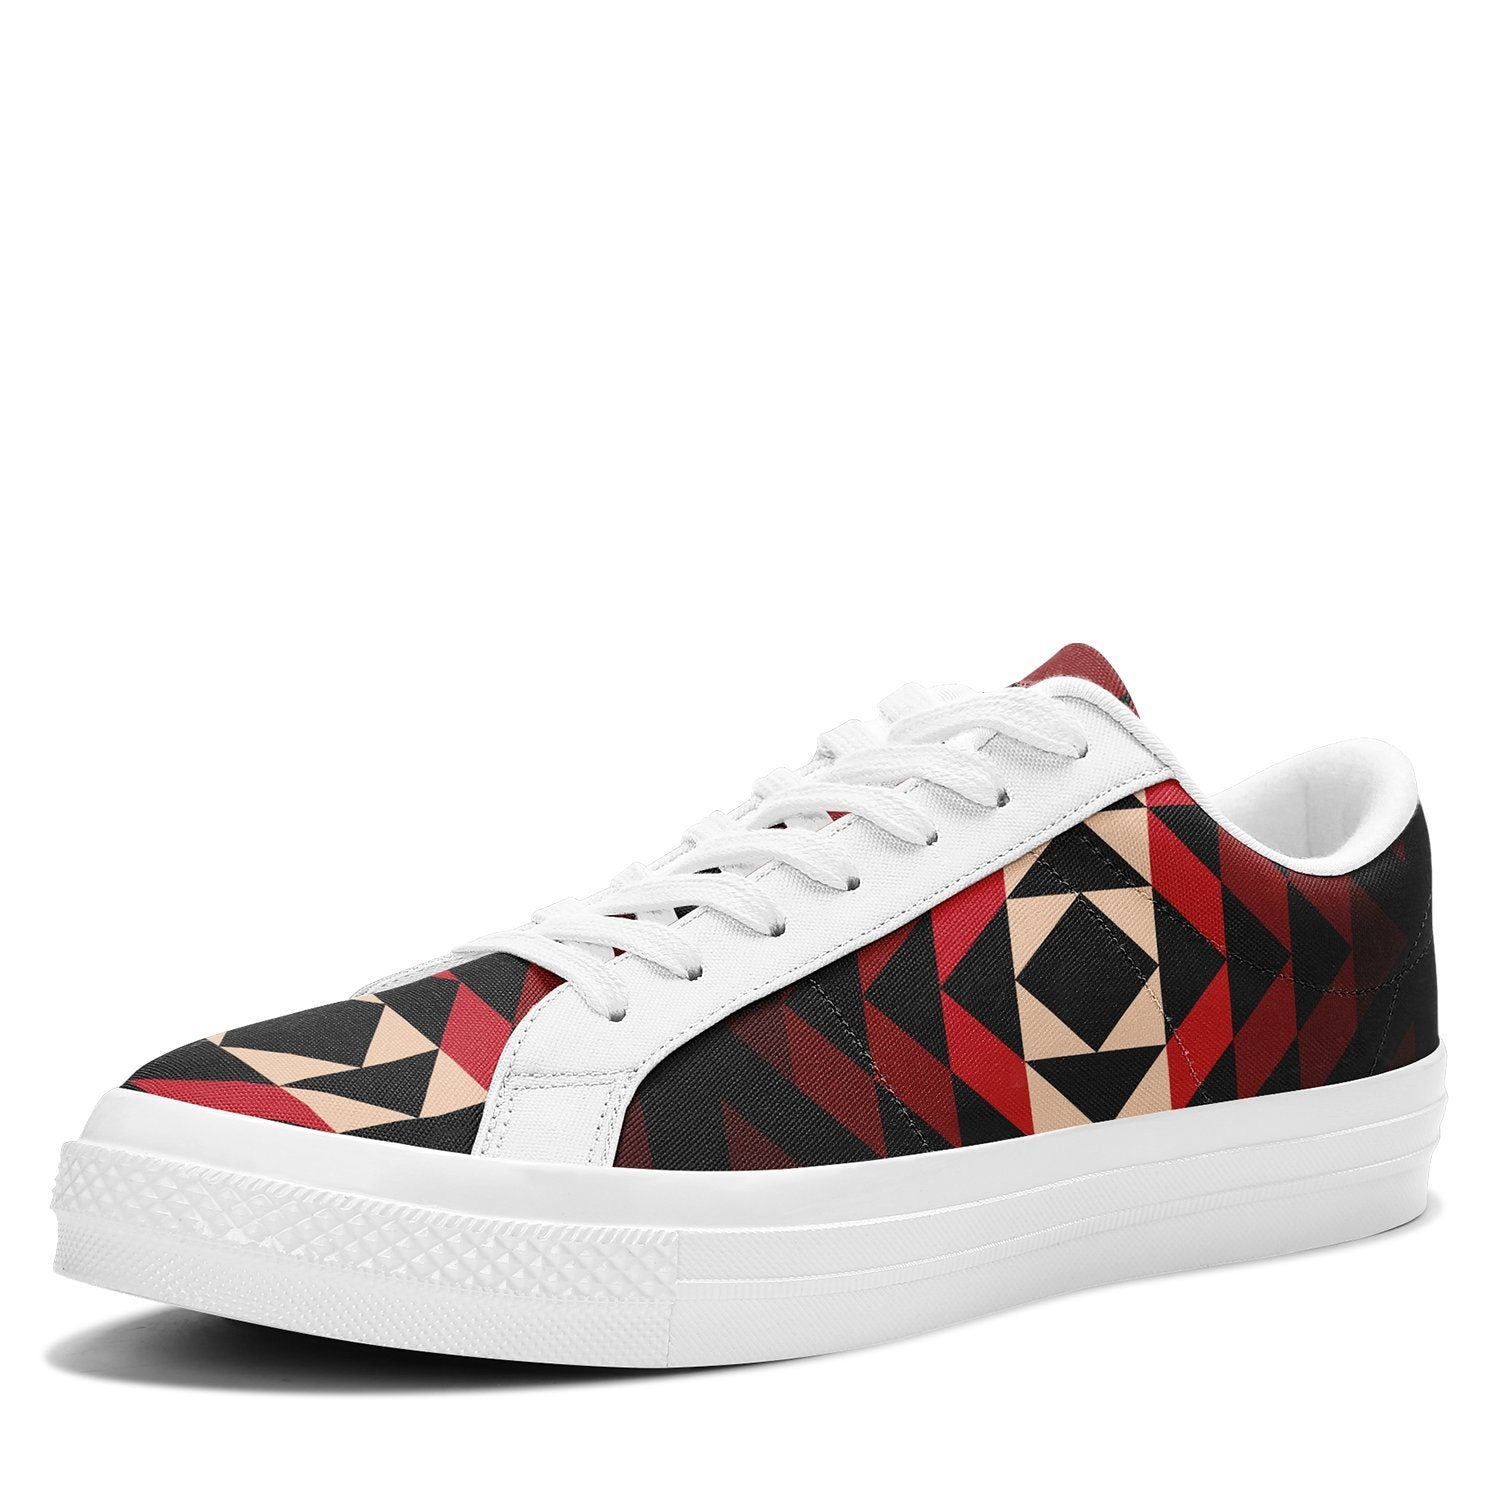 Black Rose Aapisi Low Top Canvas Shoes White Sole aapisi Herman 